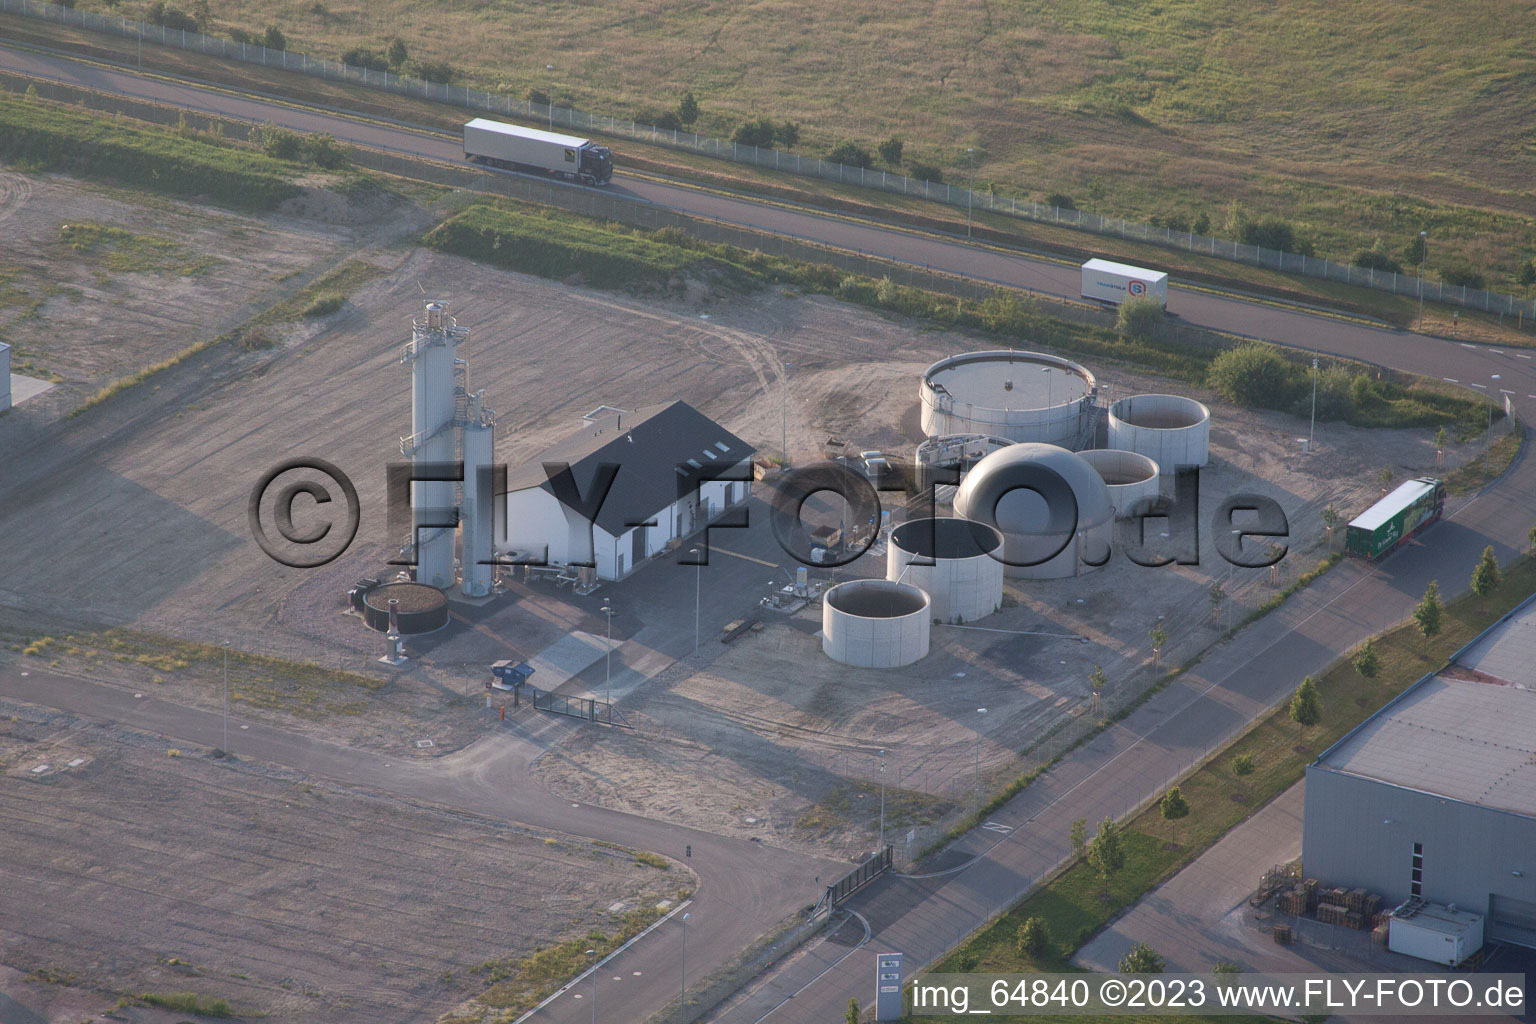 Oberwald industrial area in Wörth am Rhein in the state Rhineland-Palatinate, Germany from above